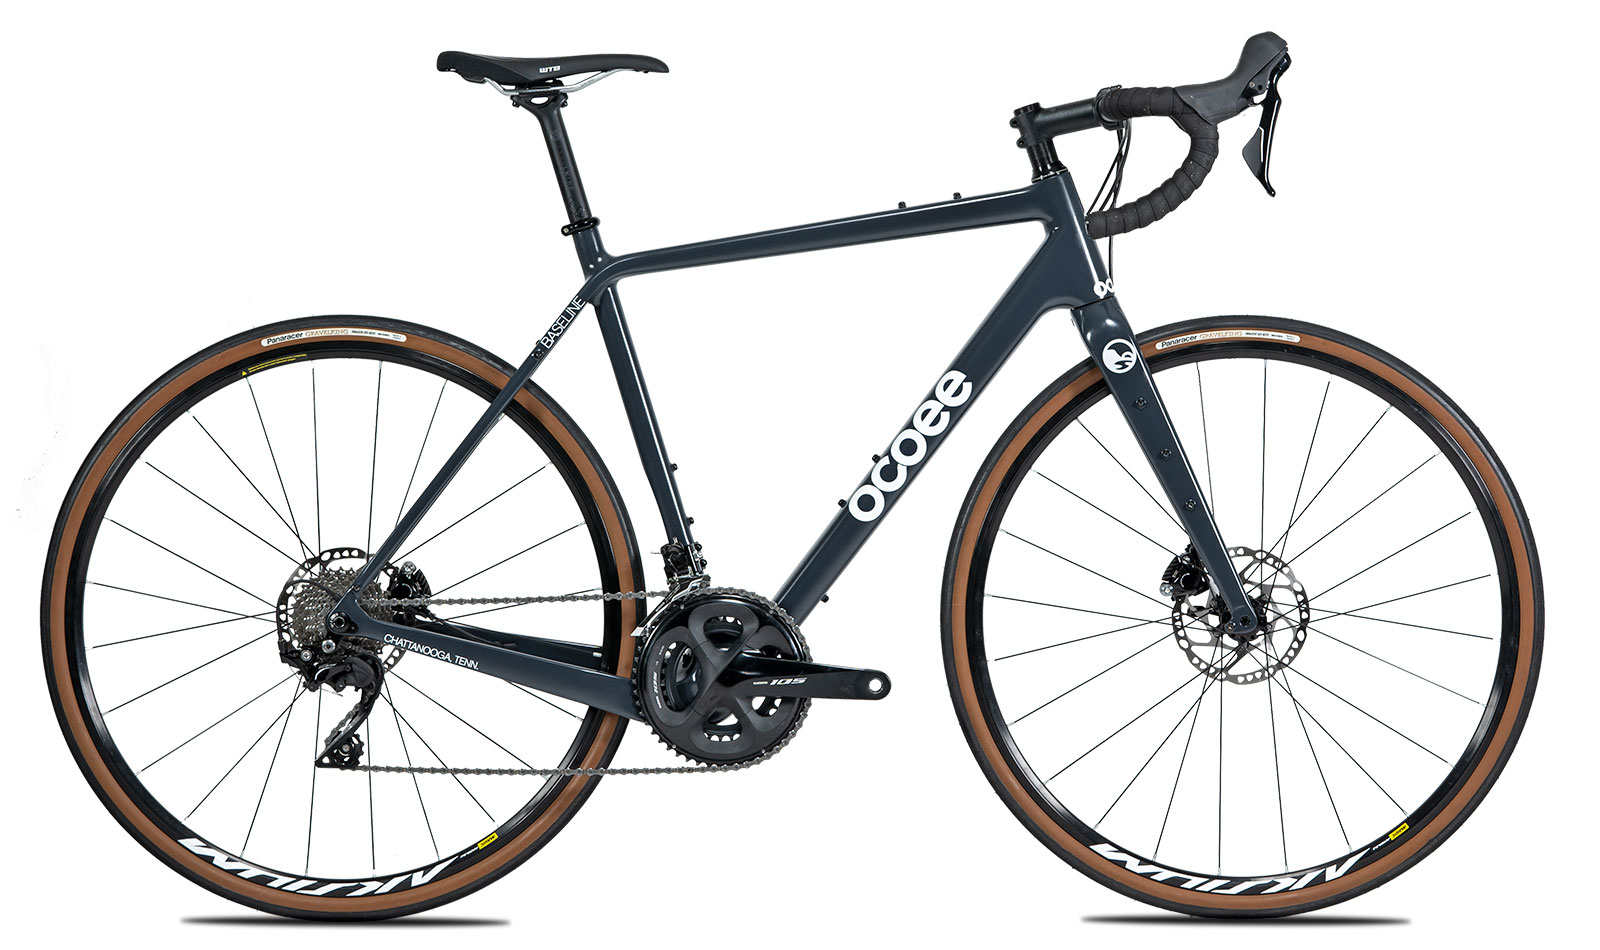 Ocoee carbon bikes consumer-direct affordable carbon all-road gravel adventure and trail mountain bikes